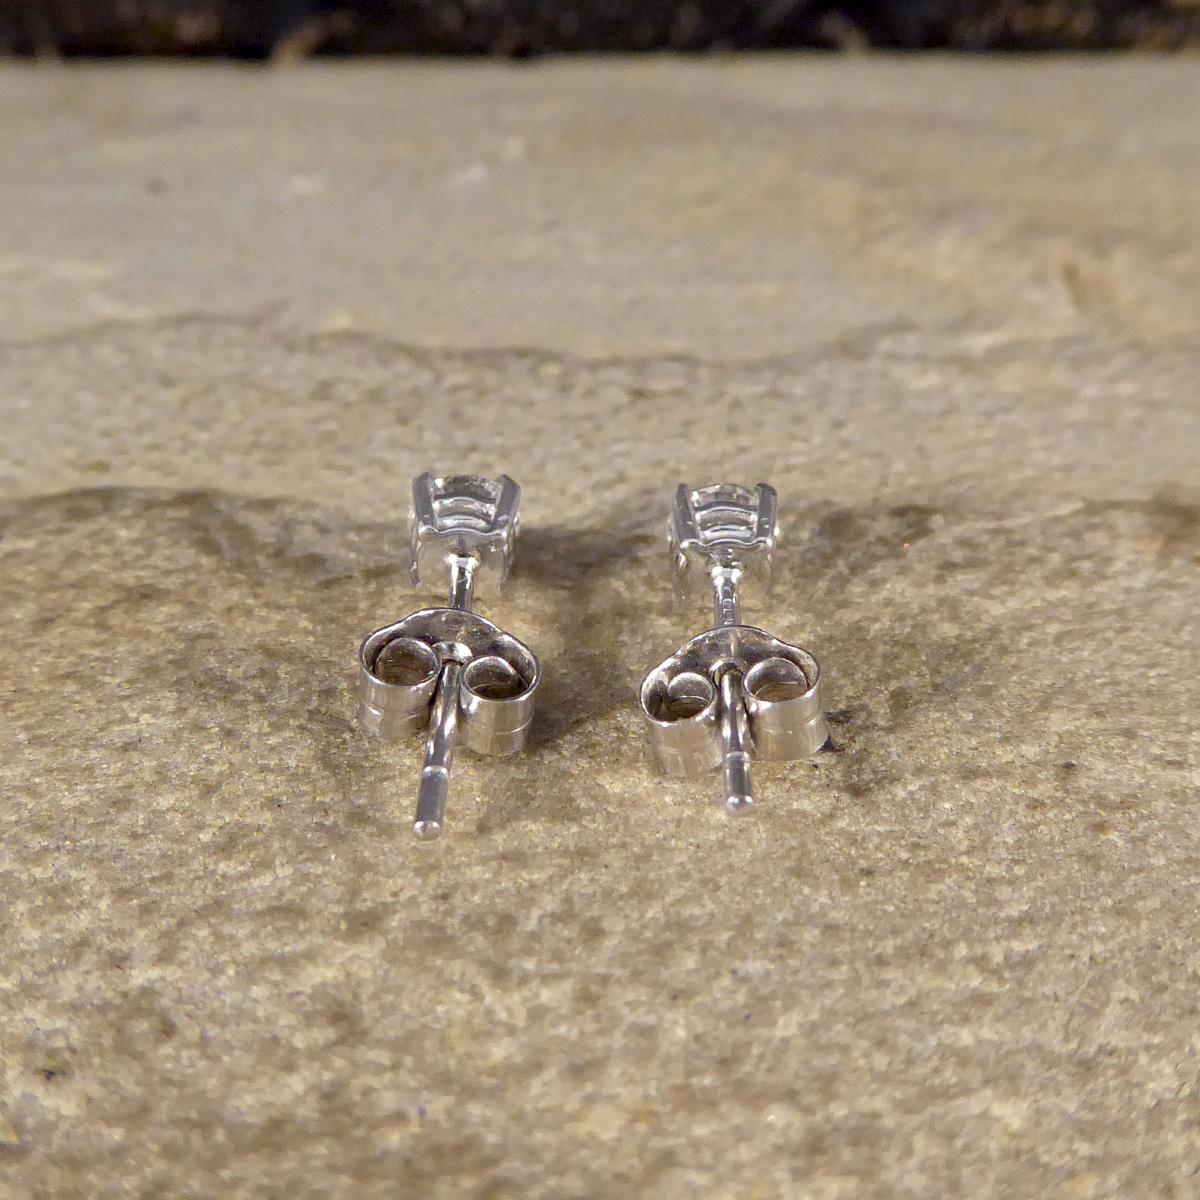 Brilliant Cut 0.53ct Diamond Stud Earrings in 18ct White Gold In New Condition For Sale In Yorkshire, West Yorkshire